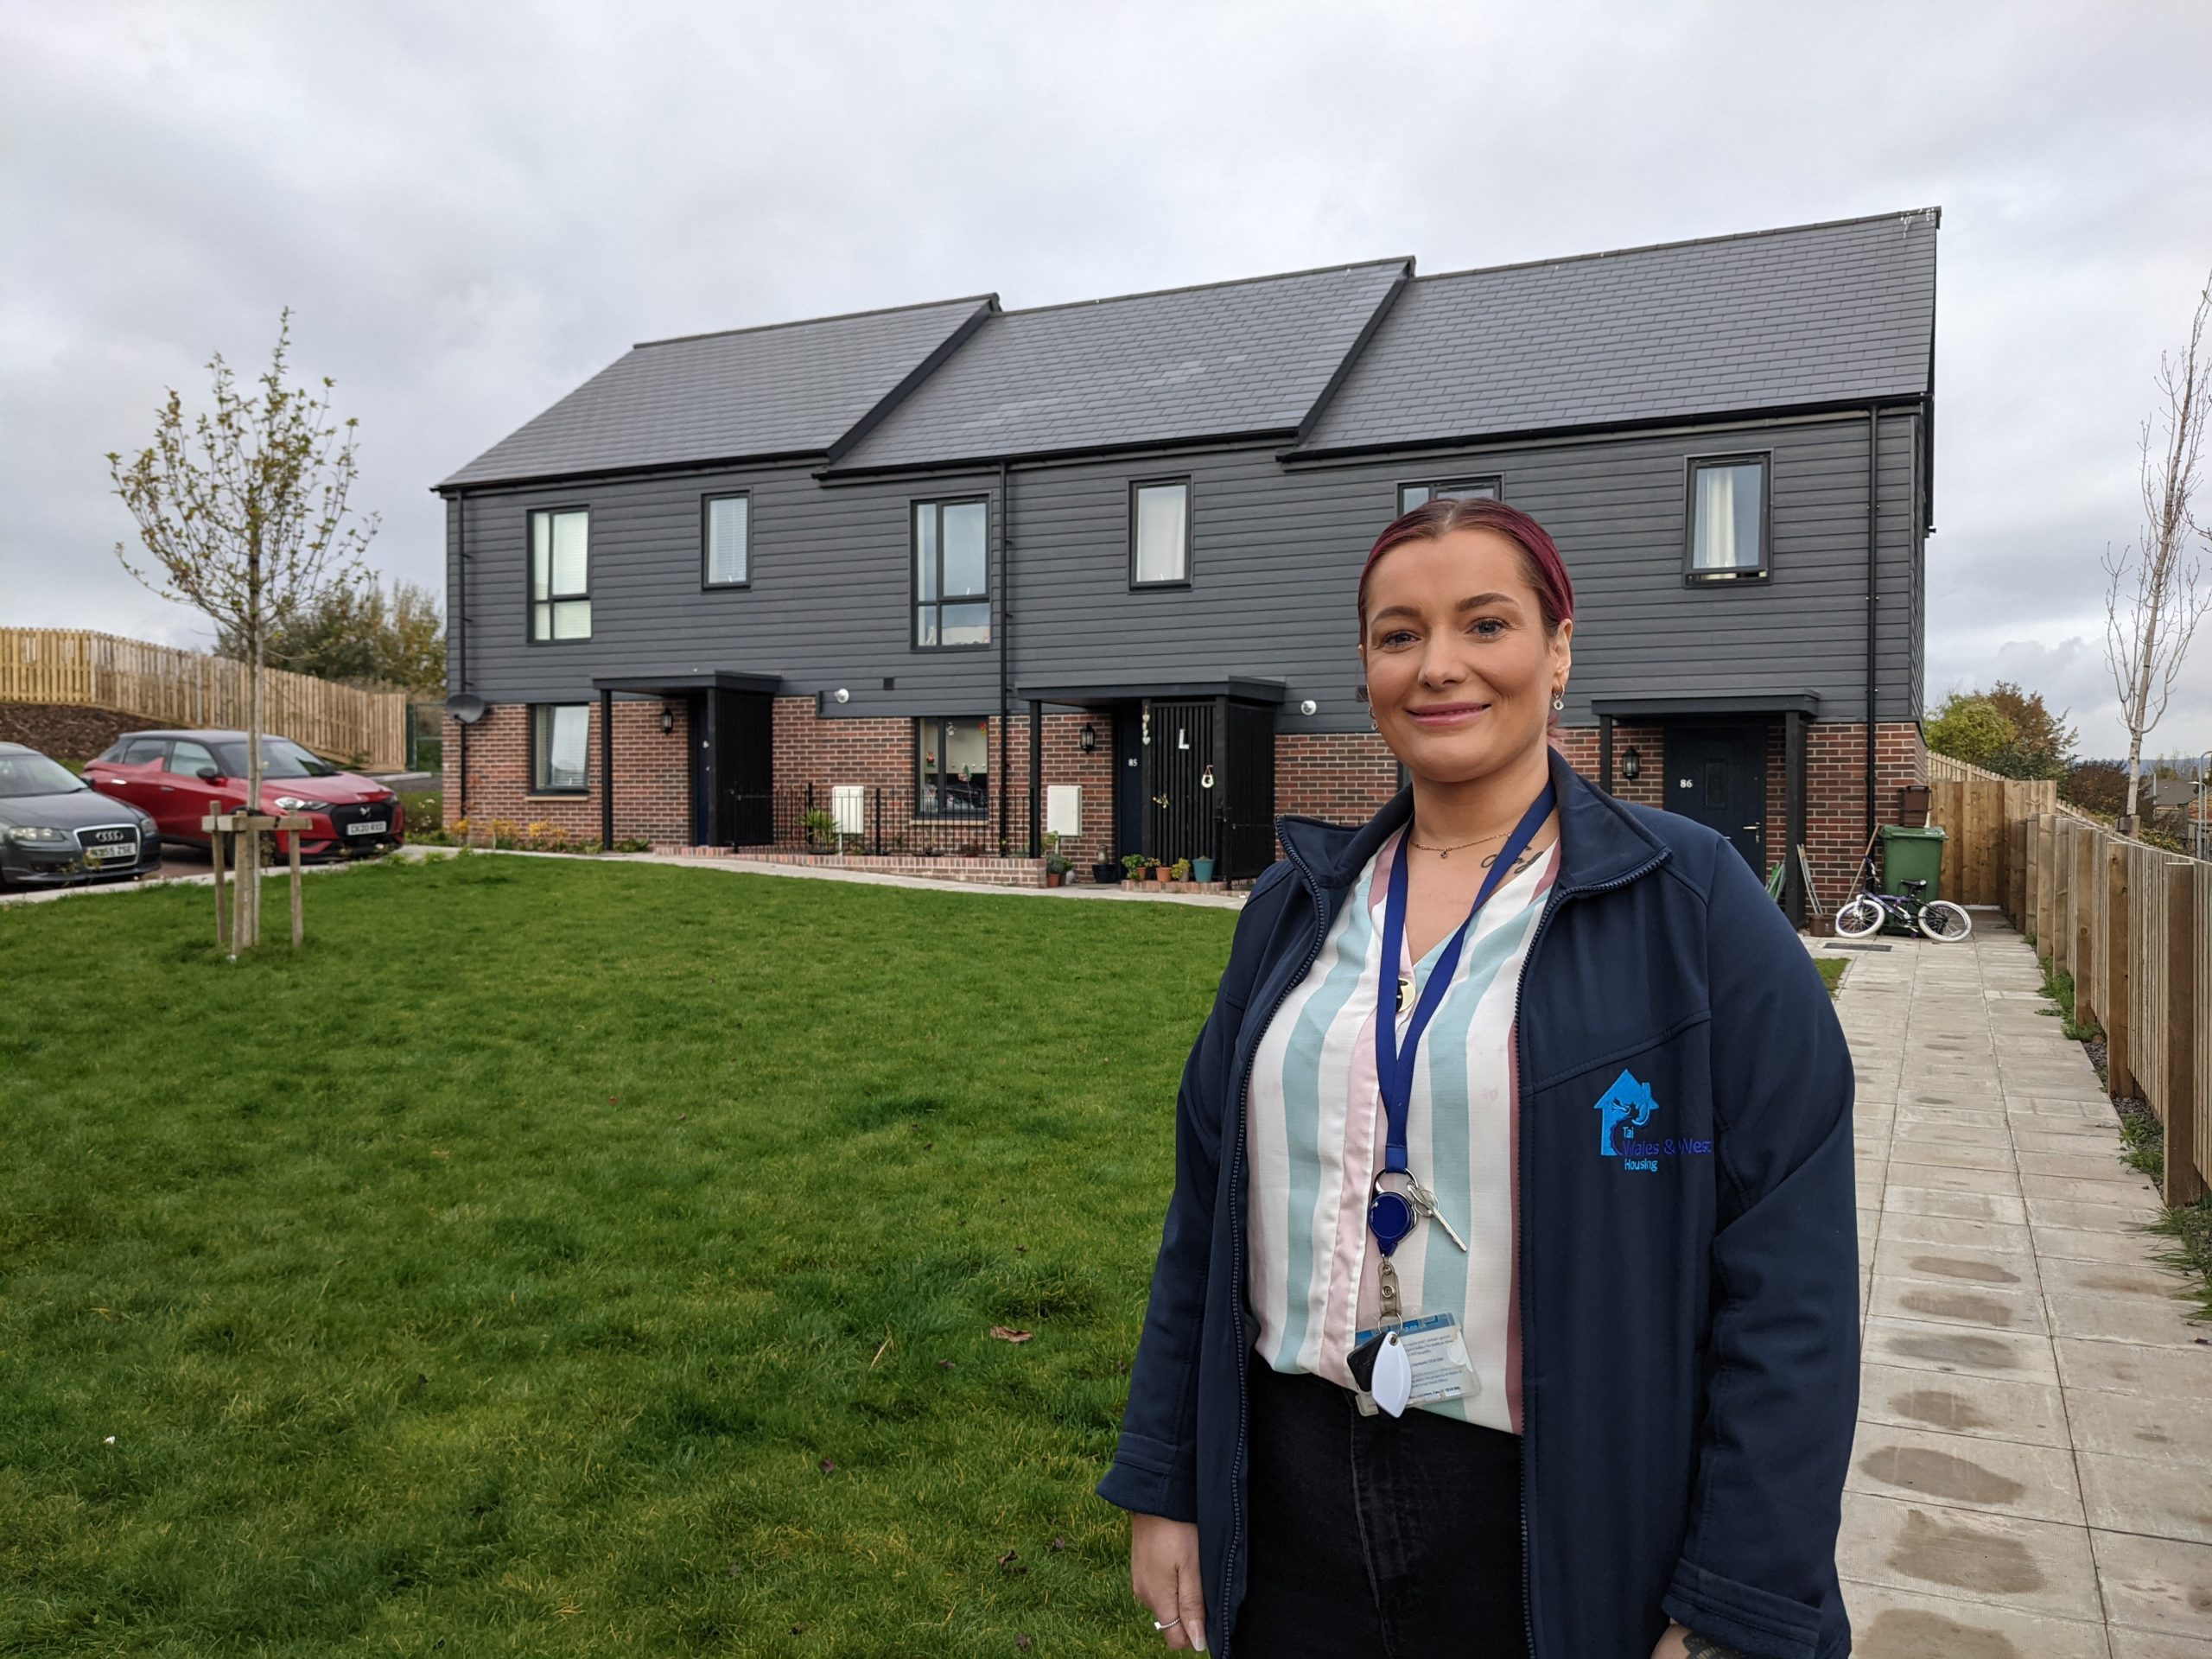 WWH Housing Officer in front of three properties smiling to camera